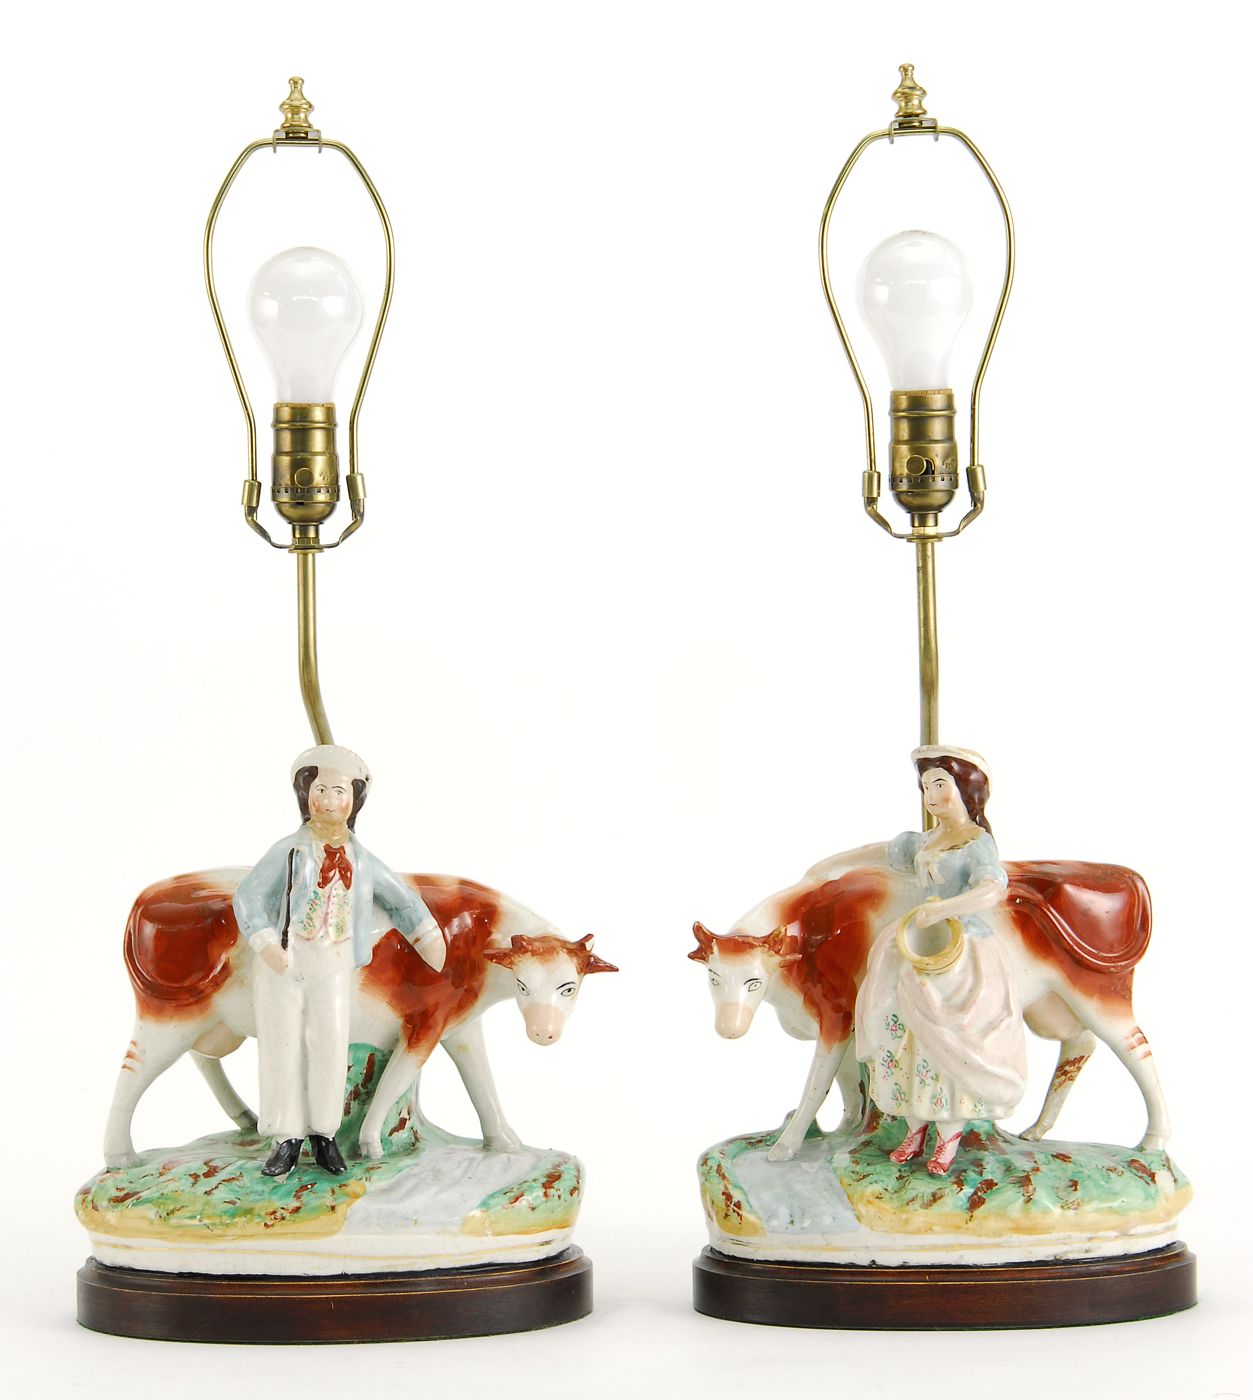 PAIR OF STAFFORDSHIRE FIGURE GROUPSMid-19th